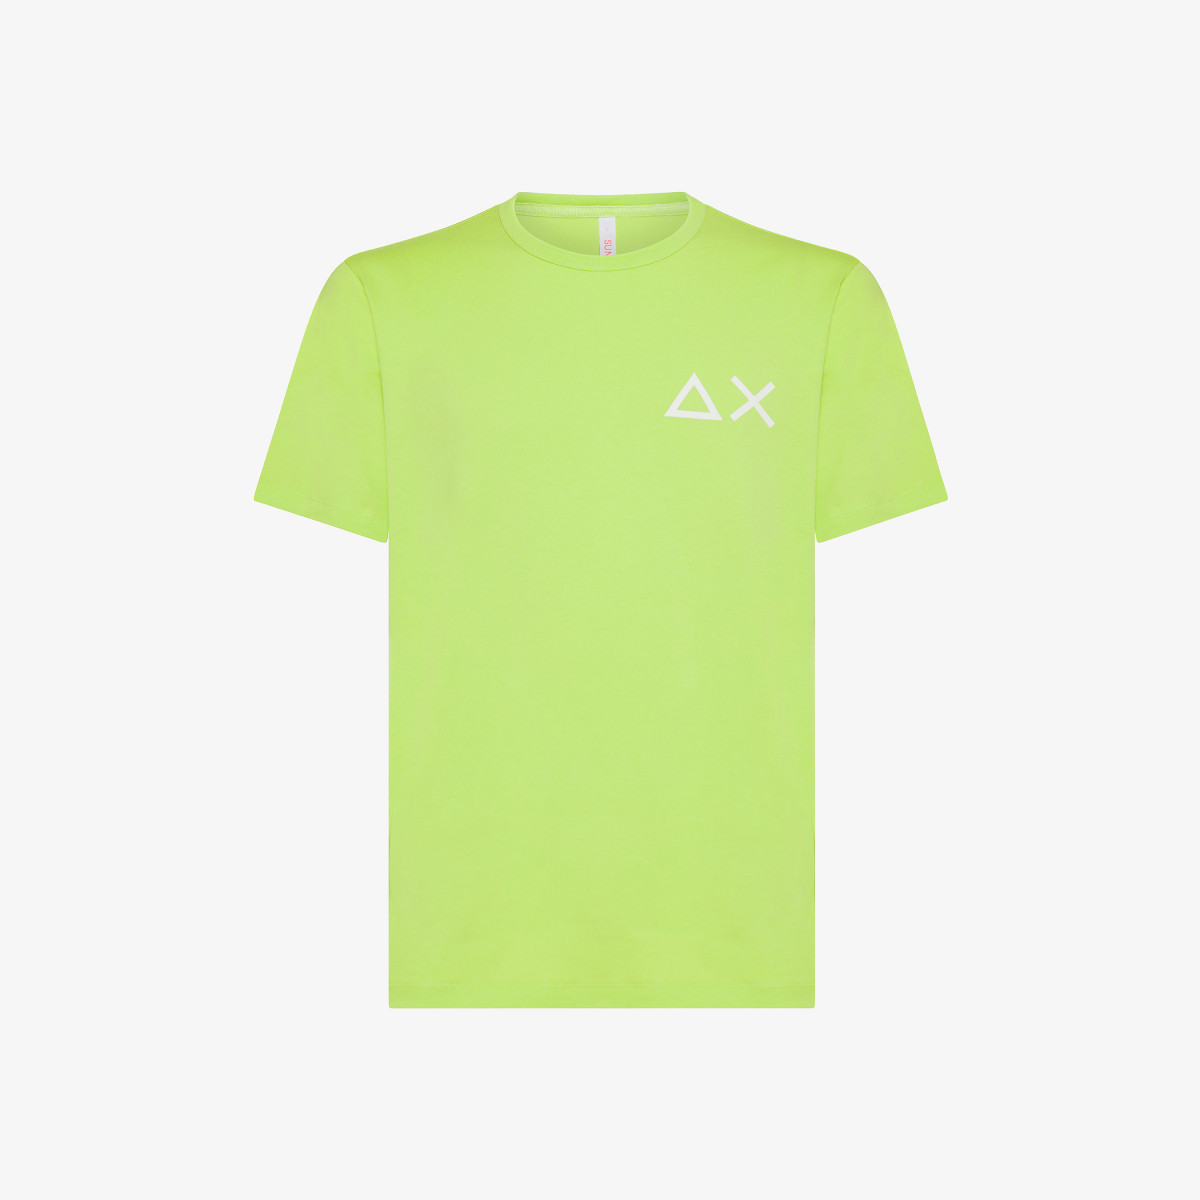 T-SHIRT BIG AX LOGO ON CHEST S/S LIME